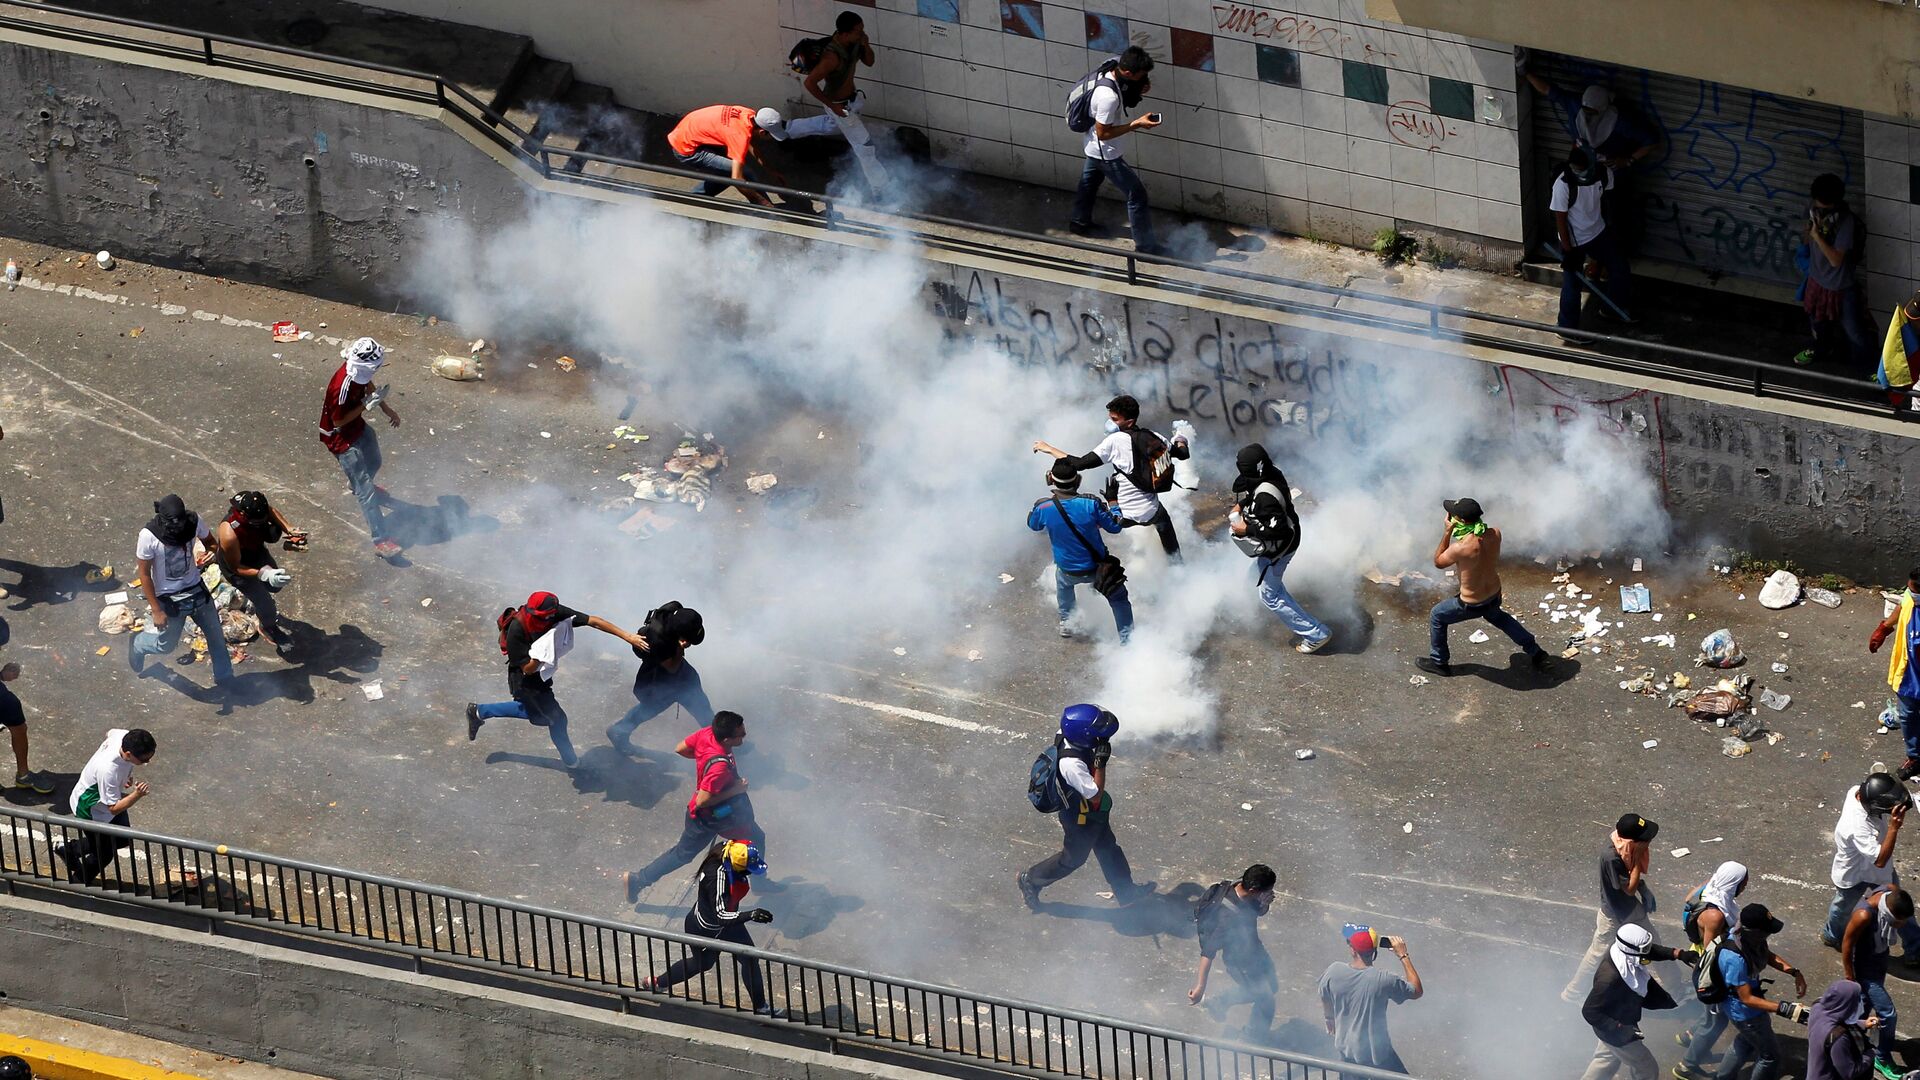 Demonstrators react during clashes with the riot police during a rally in Caracas, Venezuela, April 8, 2017 - Sputnik Afrique, 1920, 19.11.2021